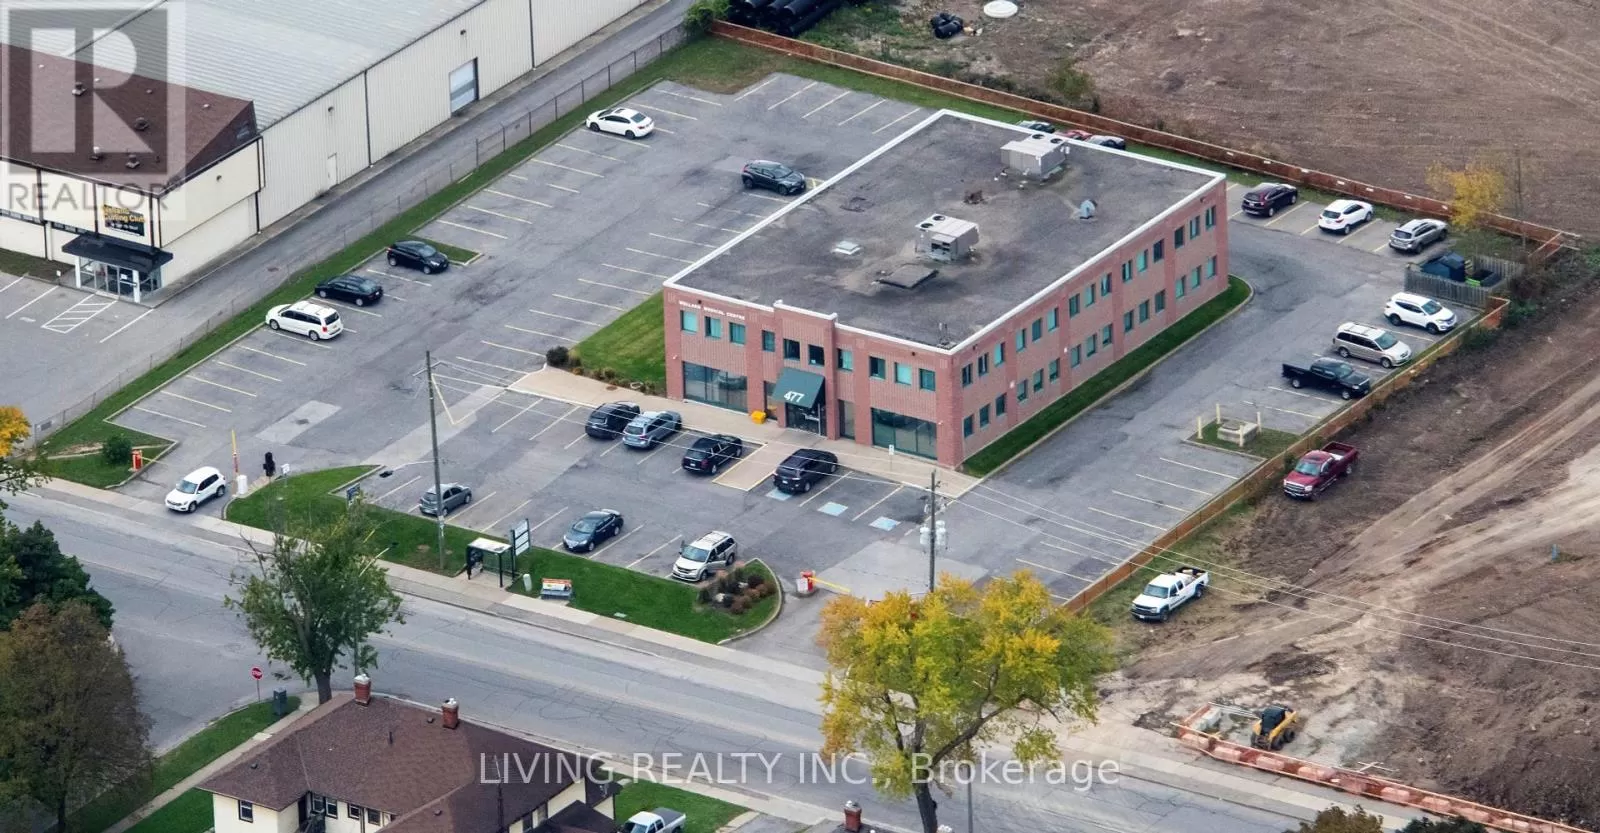 Offices for rent: 203 - 477 King Street, Welland, Ontario L3B 3K4